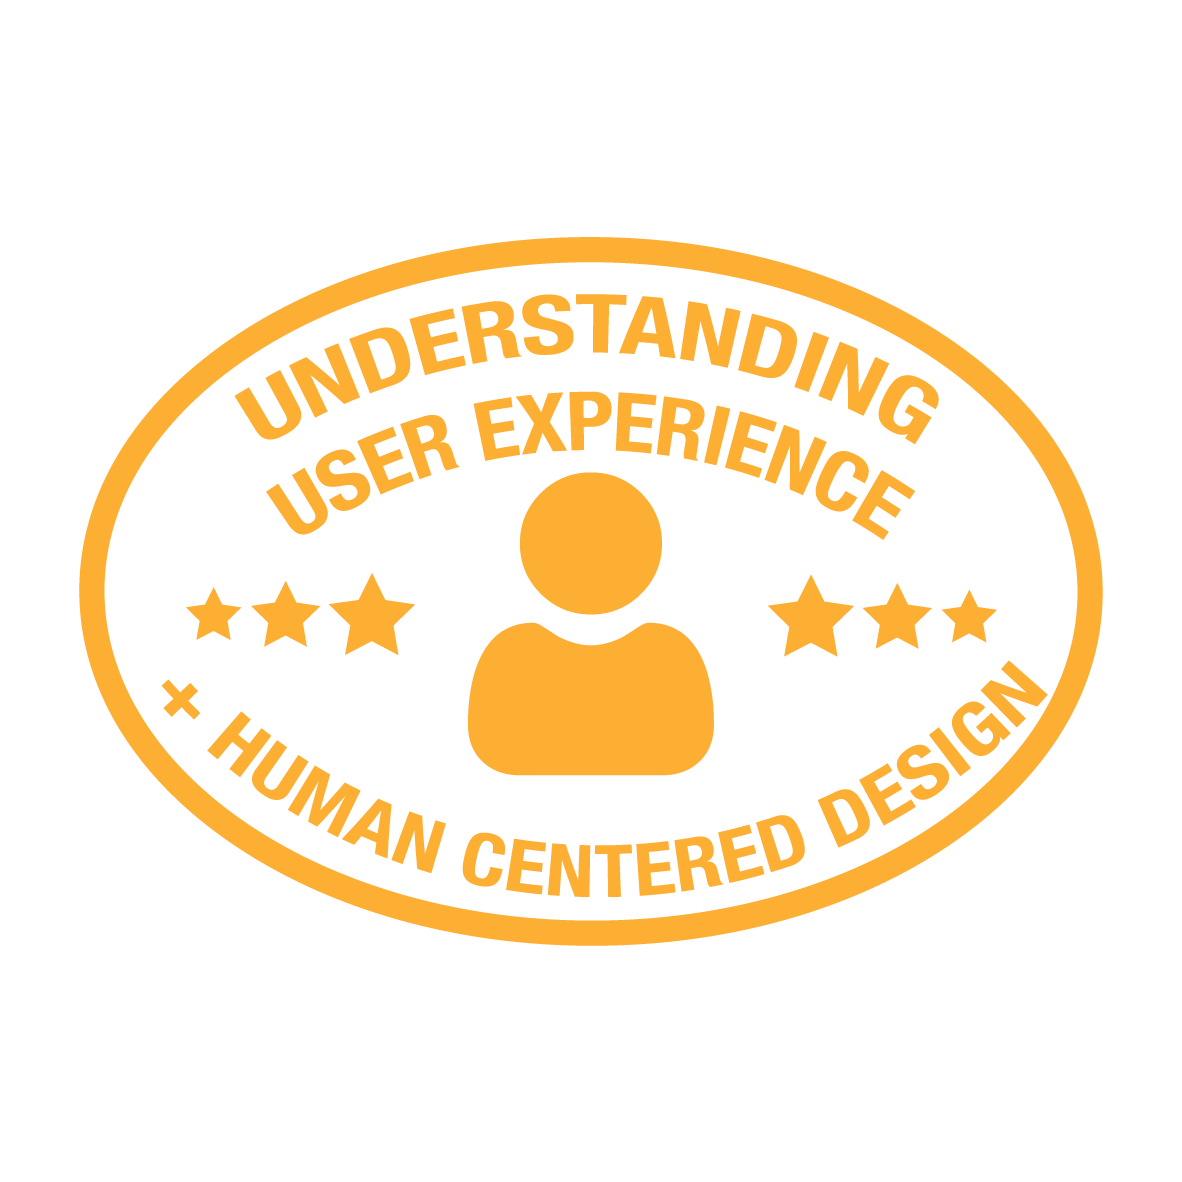 Image of User experience and human centered design AXIS stamp